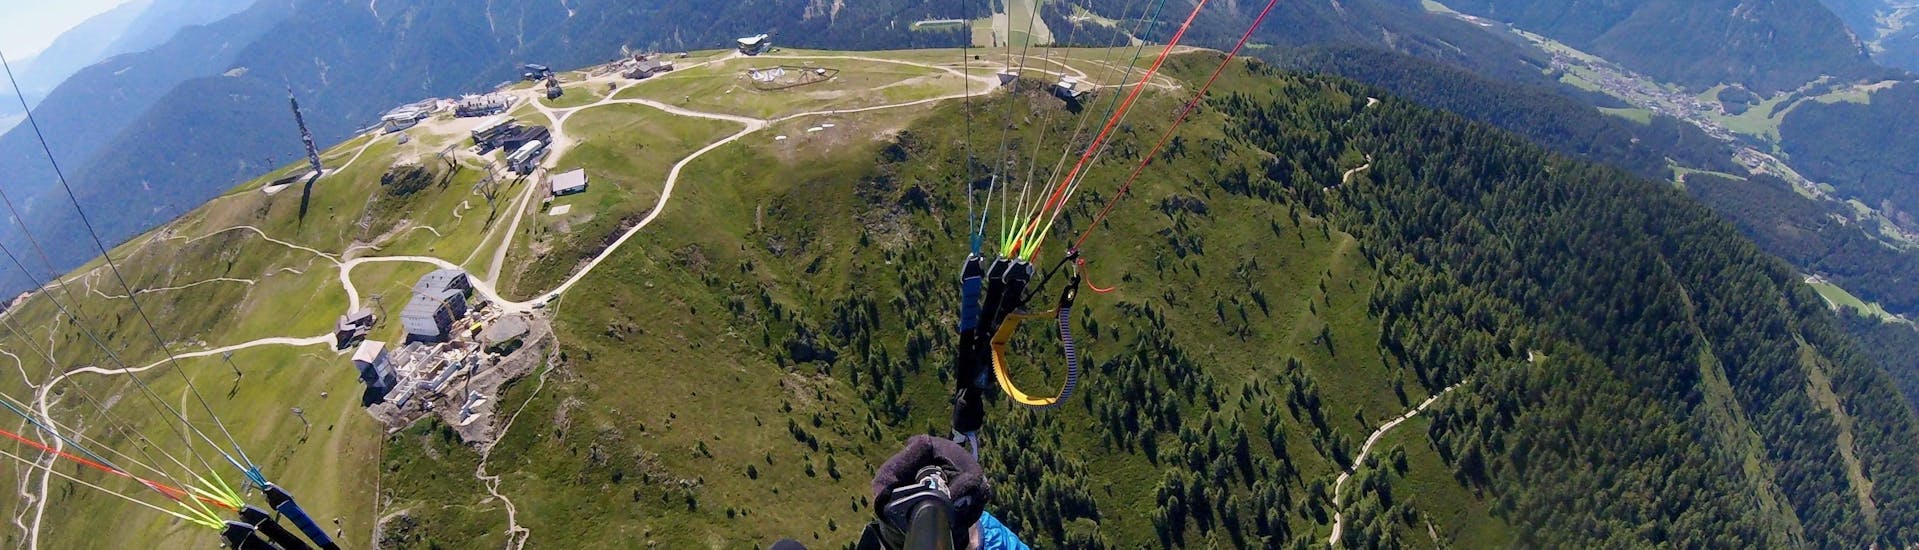 A tandem pilot from Tandemflights Kronplatz and his passenger are enjoying the view of the Puster Valley during the Thermic Tandem Paragliding from Plan de Corones.